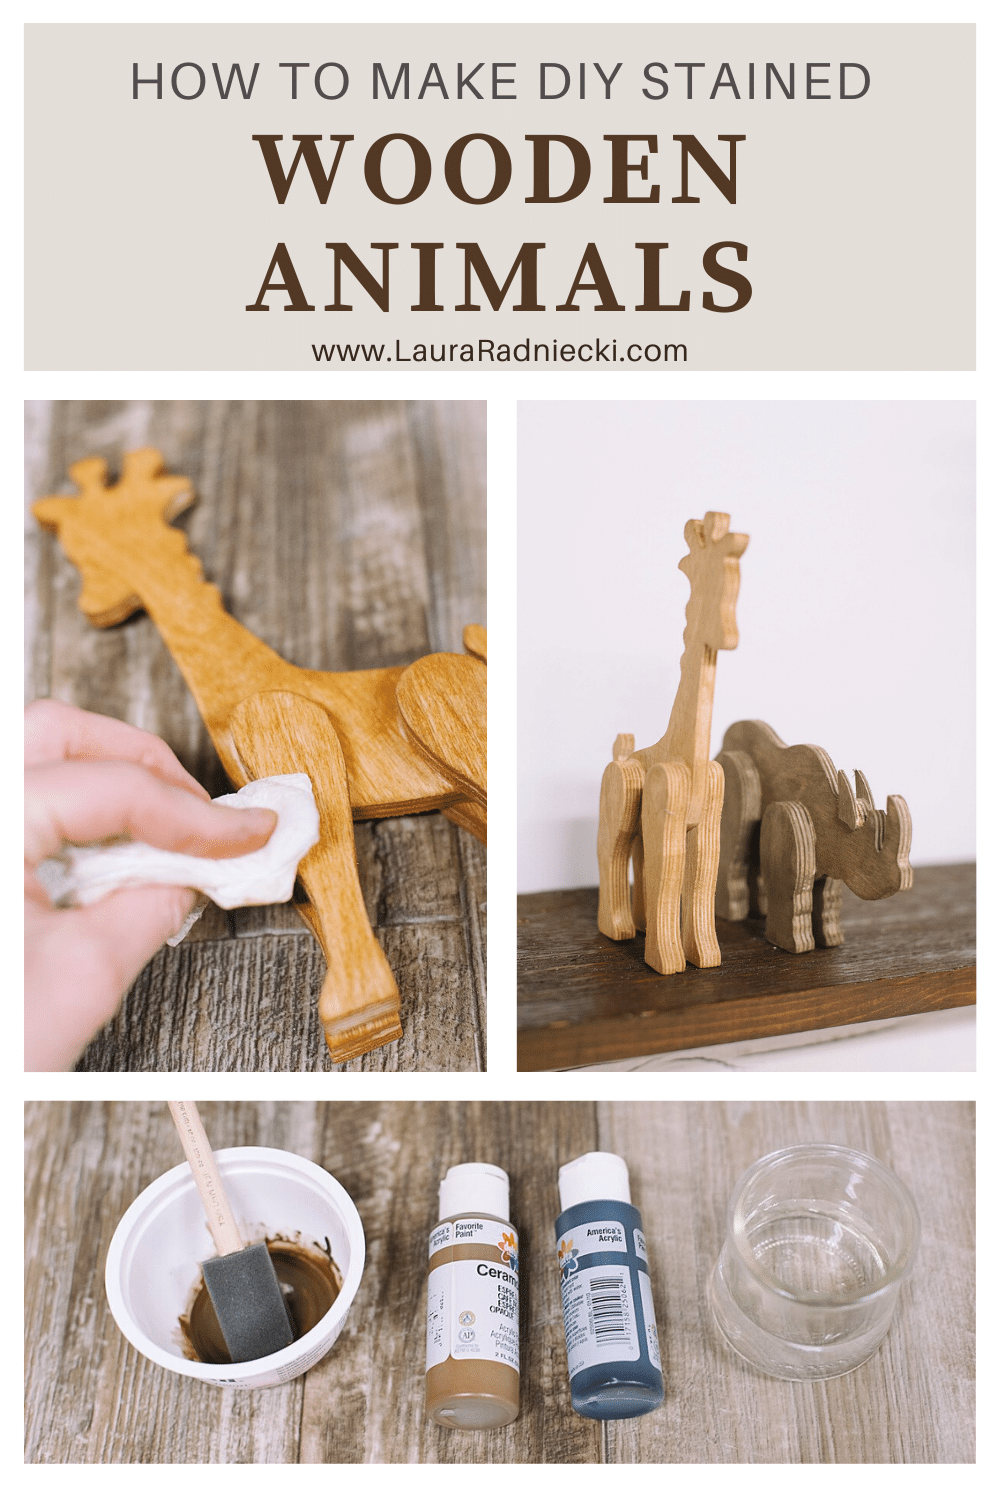 How to Make DIY Stained Wooden Animals